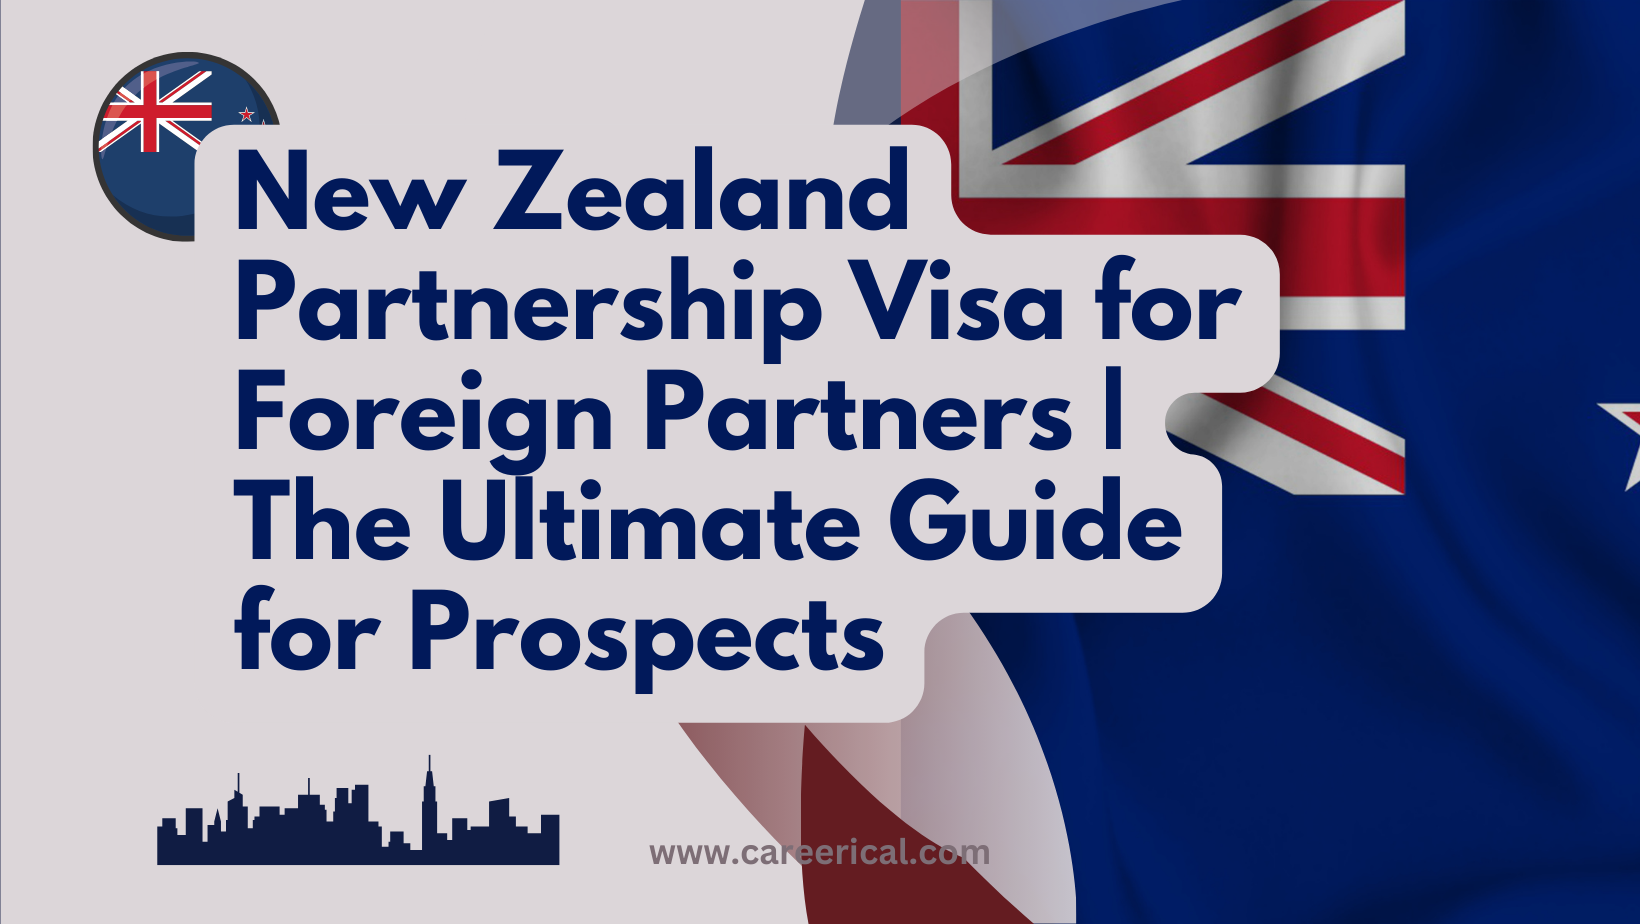 New Zealand Partnership Visa for Foreign Partners The Ultimate Guide for Prospects